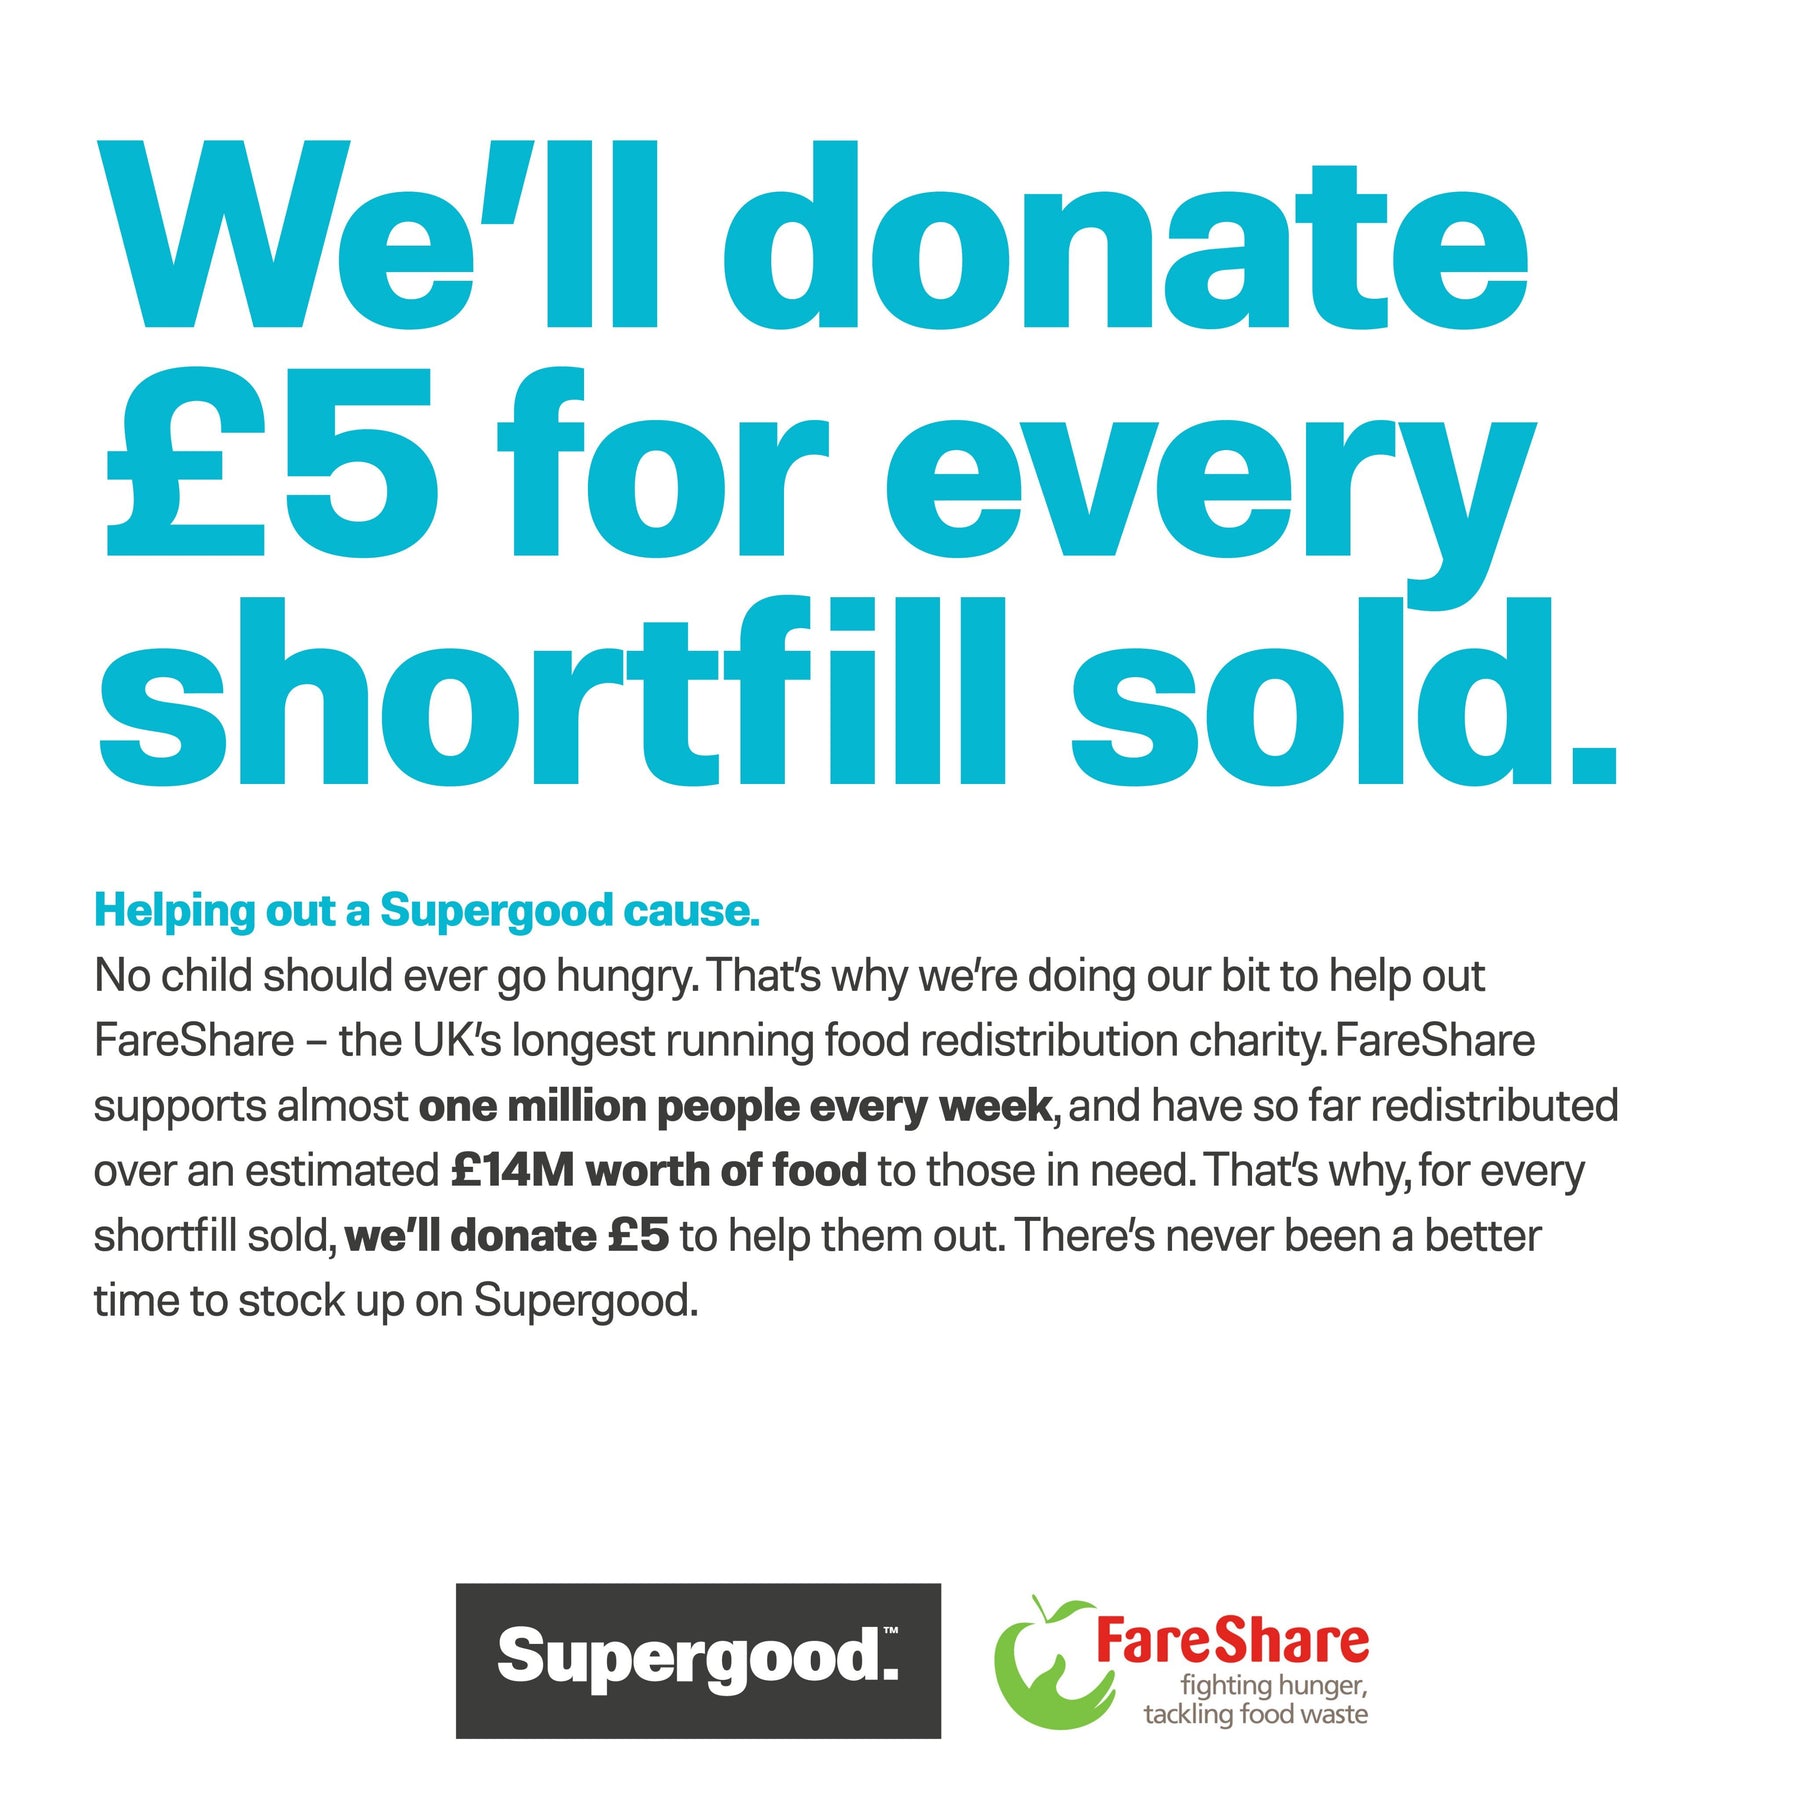 We'll donate £5 for every shortfill sold.